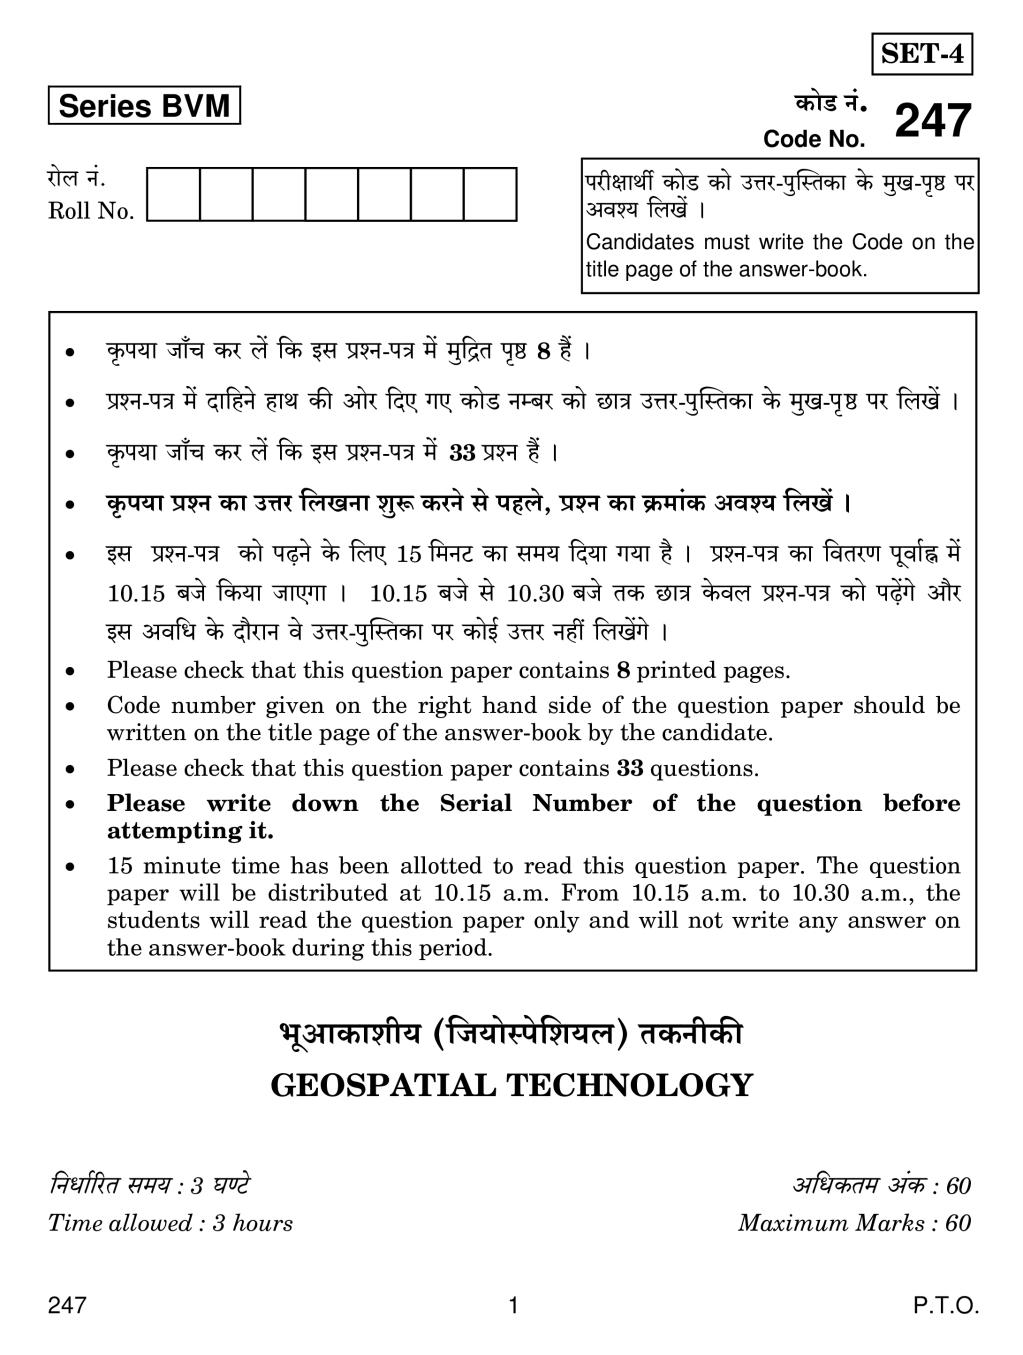 CBSE Class 12 Geospatial Technology Question Paper 2019 - Page 1